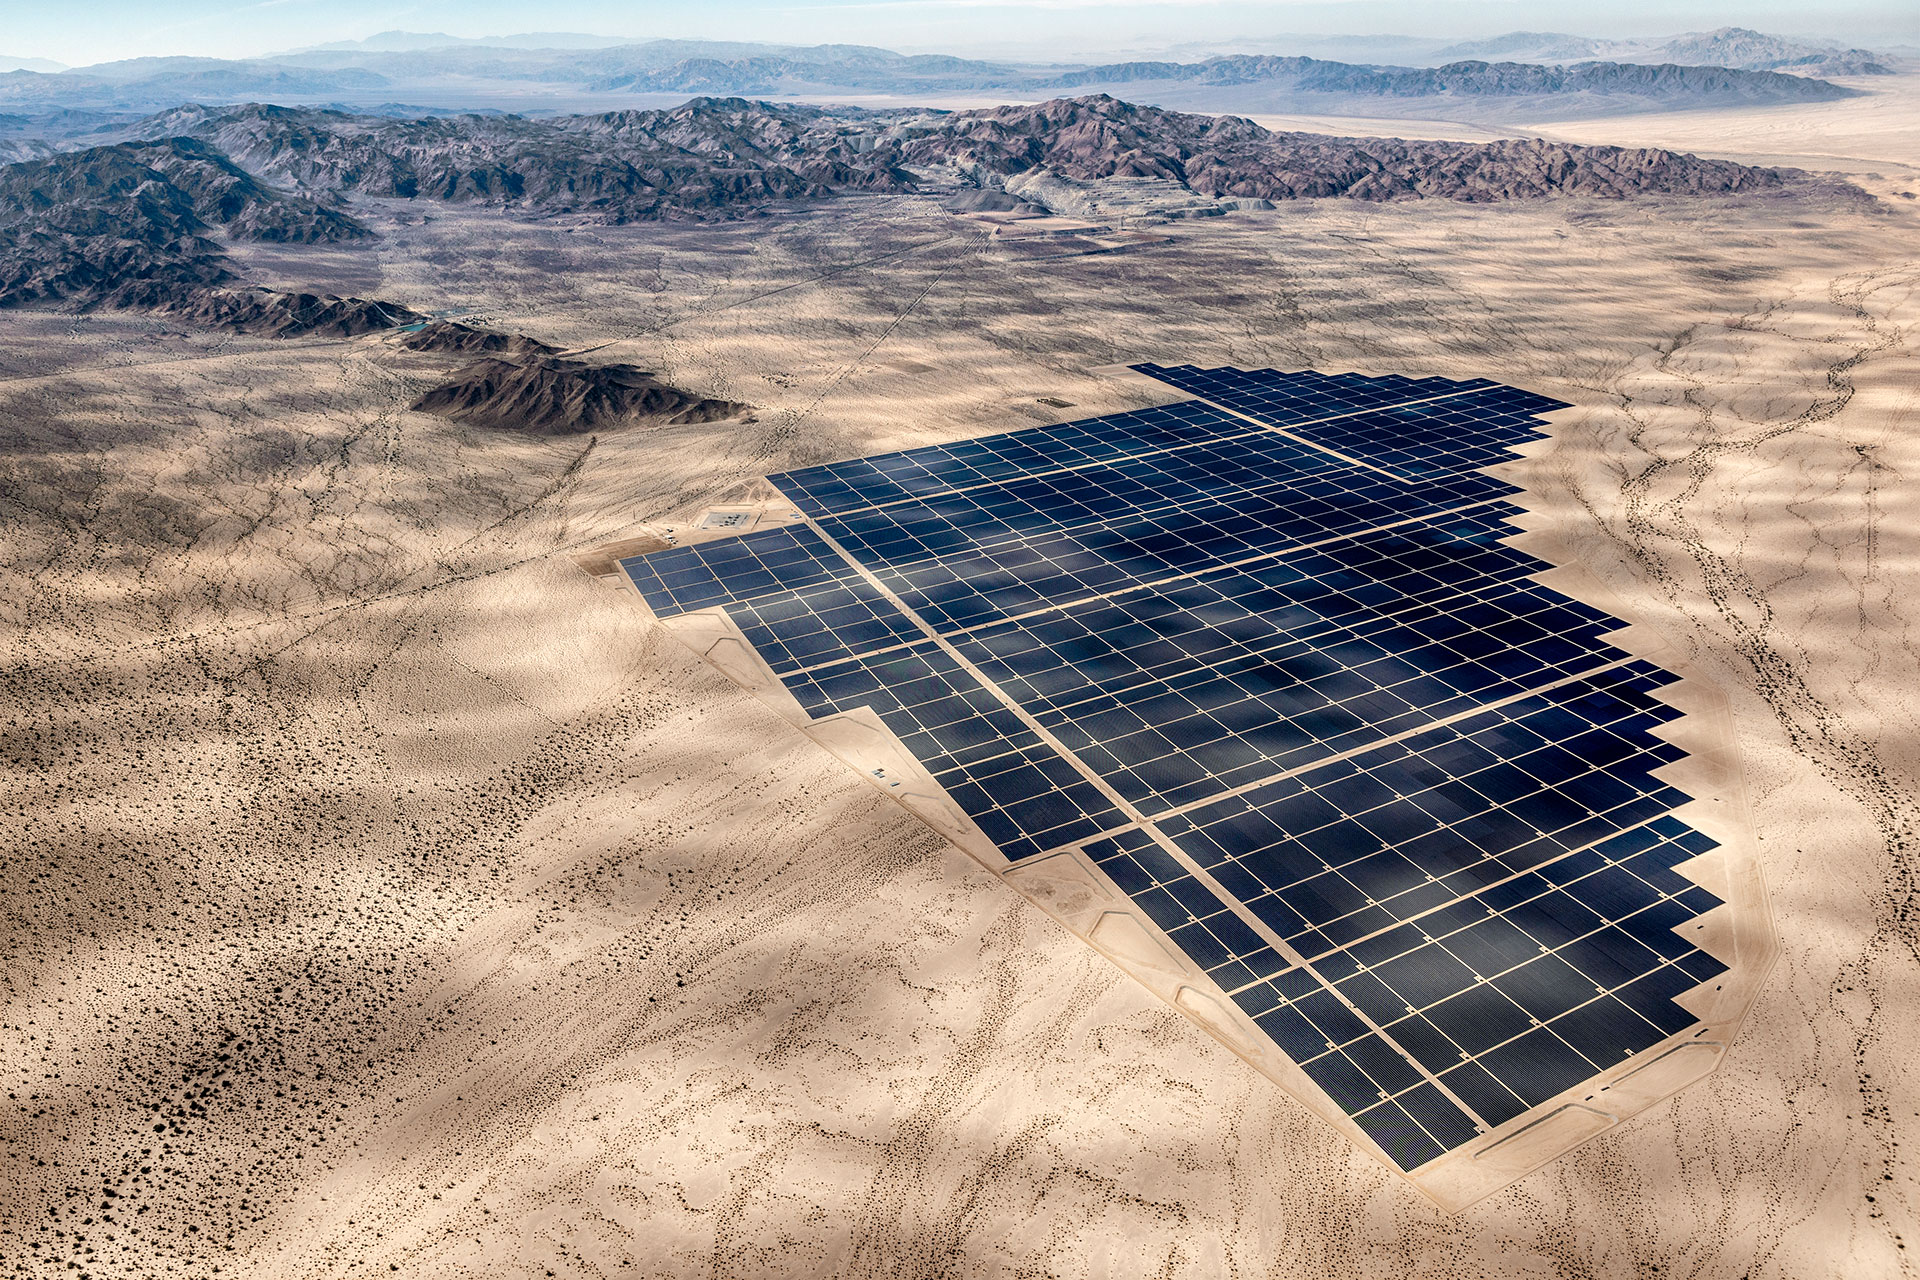 <strong>15 SQUARE KILOMETRES: SOLAR POWER PLANT </strong>15 km² (2/2): The solar power plant Desert Sunlight in the Mojave Desert in California currently has a capacity of 550 megawatts – one-and-a-half times that of the Mühleberg atomic power station in the canton of Bern in Switzerland. It has the same surface area needed by the Square Kilometer Array to observe the stars. Image: 2015 Jamey Stillings